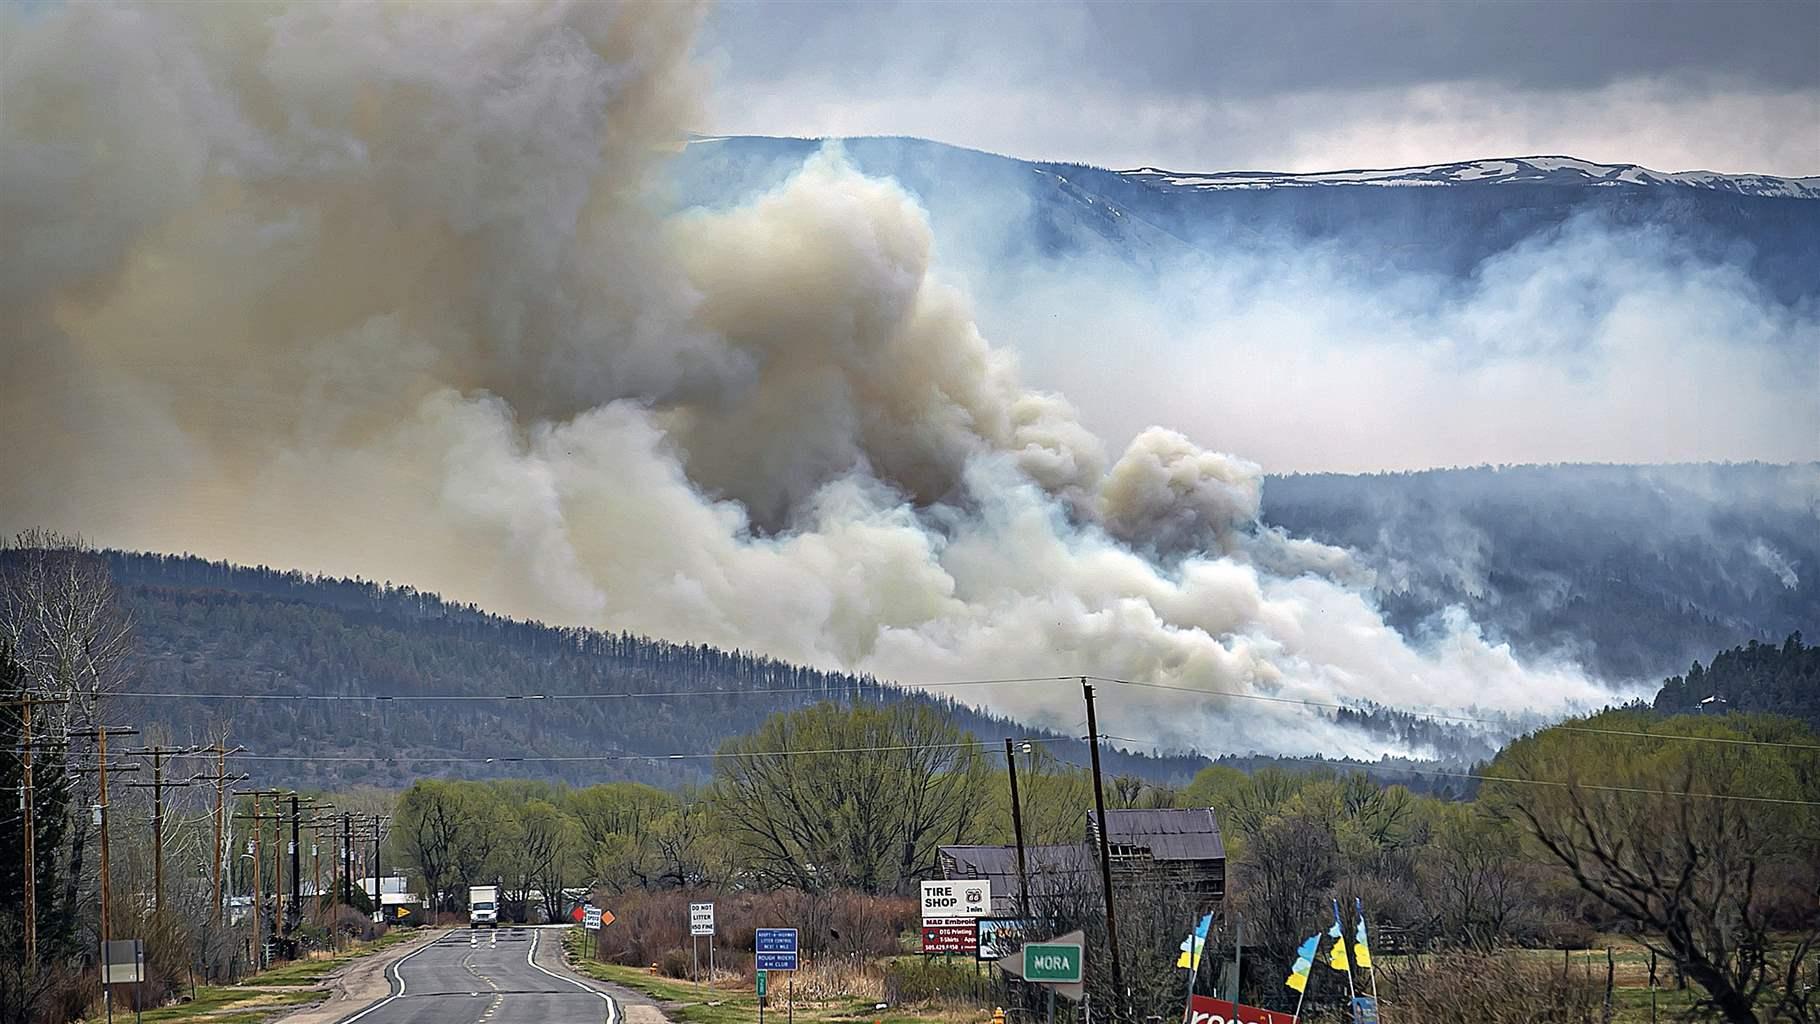 A two-lane highway stretches ahead toward forested foothills, behind which snow can be seen on the peaks of the crest of a mountain range. Clouds of smoke rise from the foothills, filling much of the sky. 